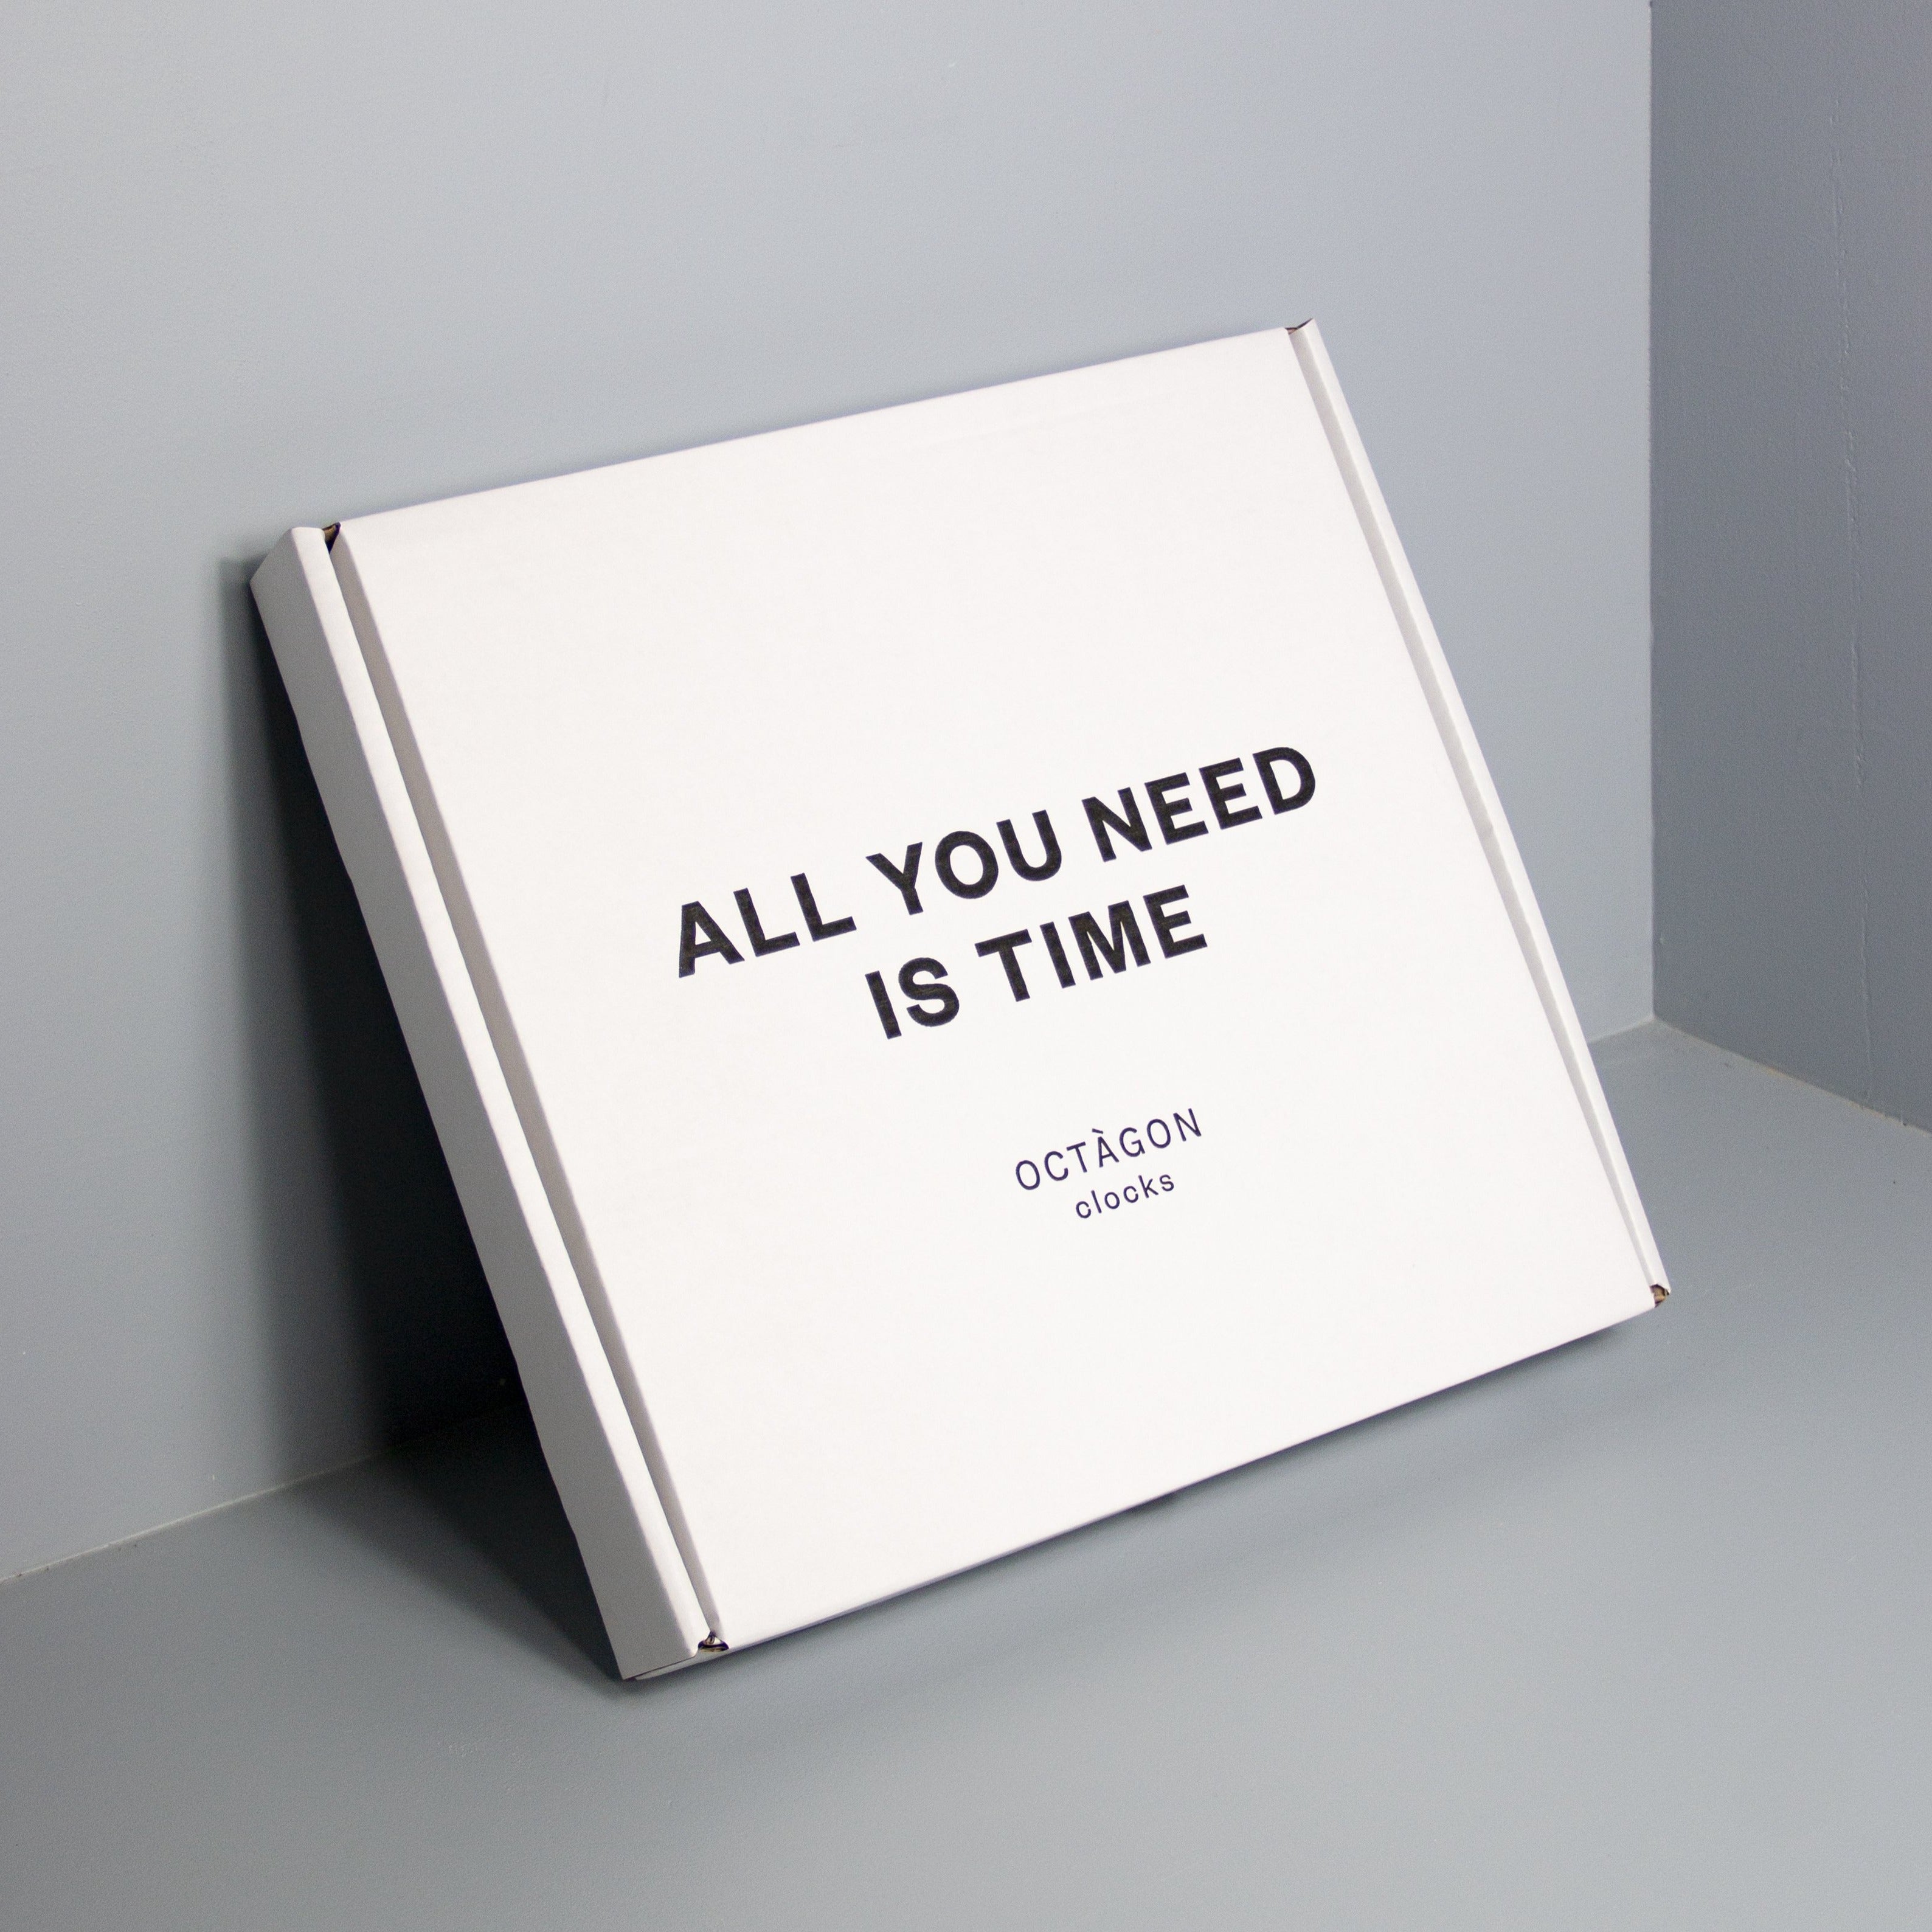 Box with &quot;All you need is time&quot; print leaning on a gray wall | Caja estampada &quot;All ypu need is time&quot; apoyada en una pared gris. | Caixa estampada &quot;All you need is time&quot; recolzada en una paret gris.